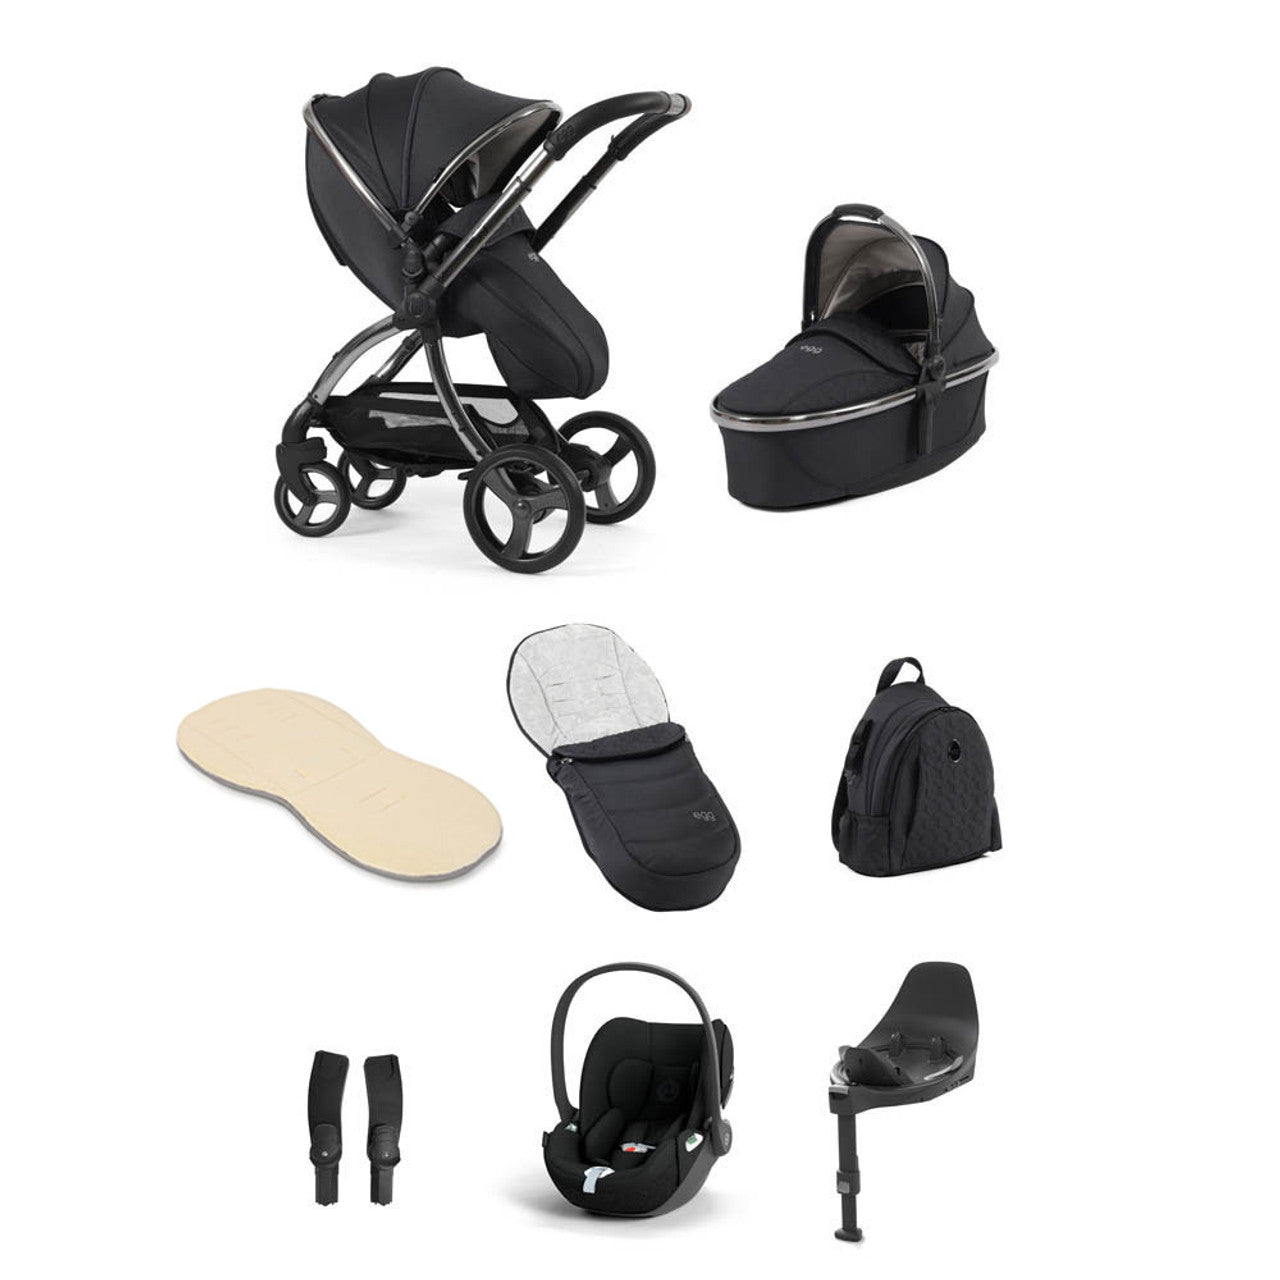 Egg® 3 Luxury Cloud T i-Size Travel System Bundle - Carbonite -  | For Your Little One